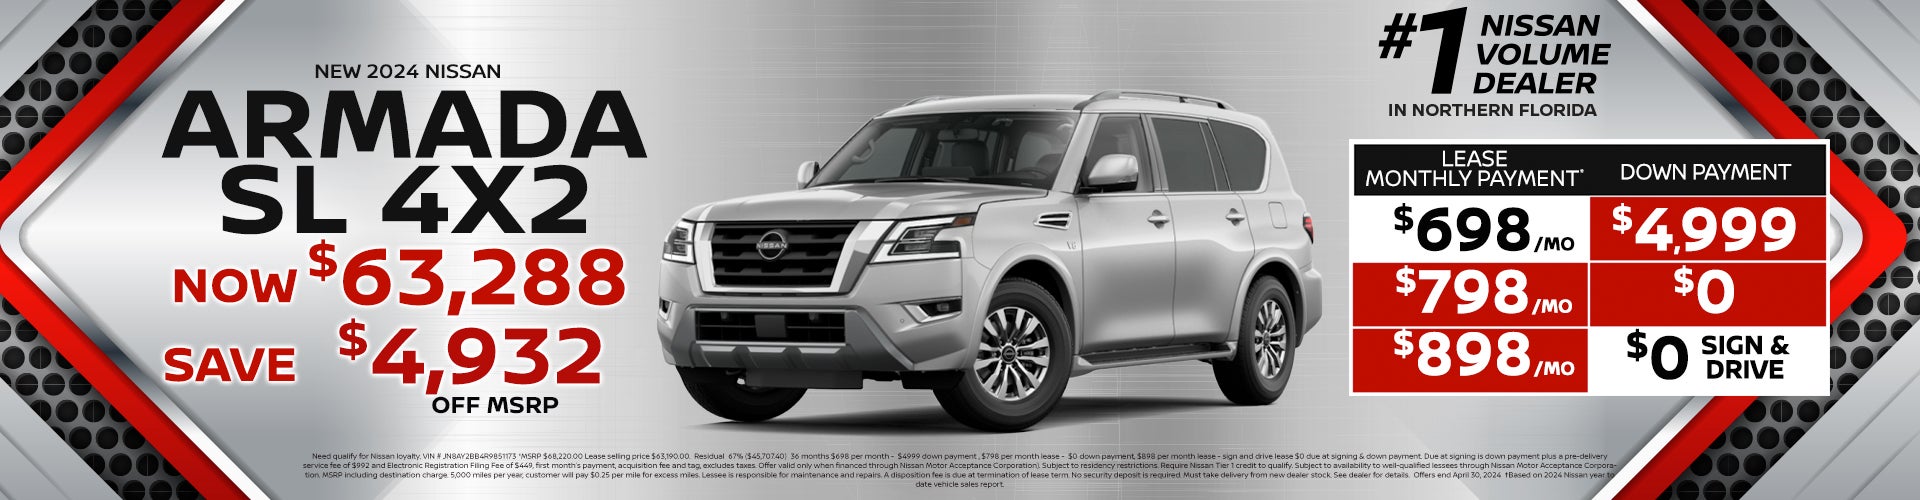 2024 Armada Lease for as low as $698